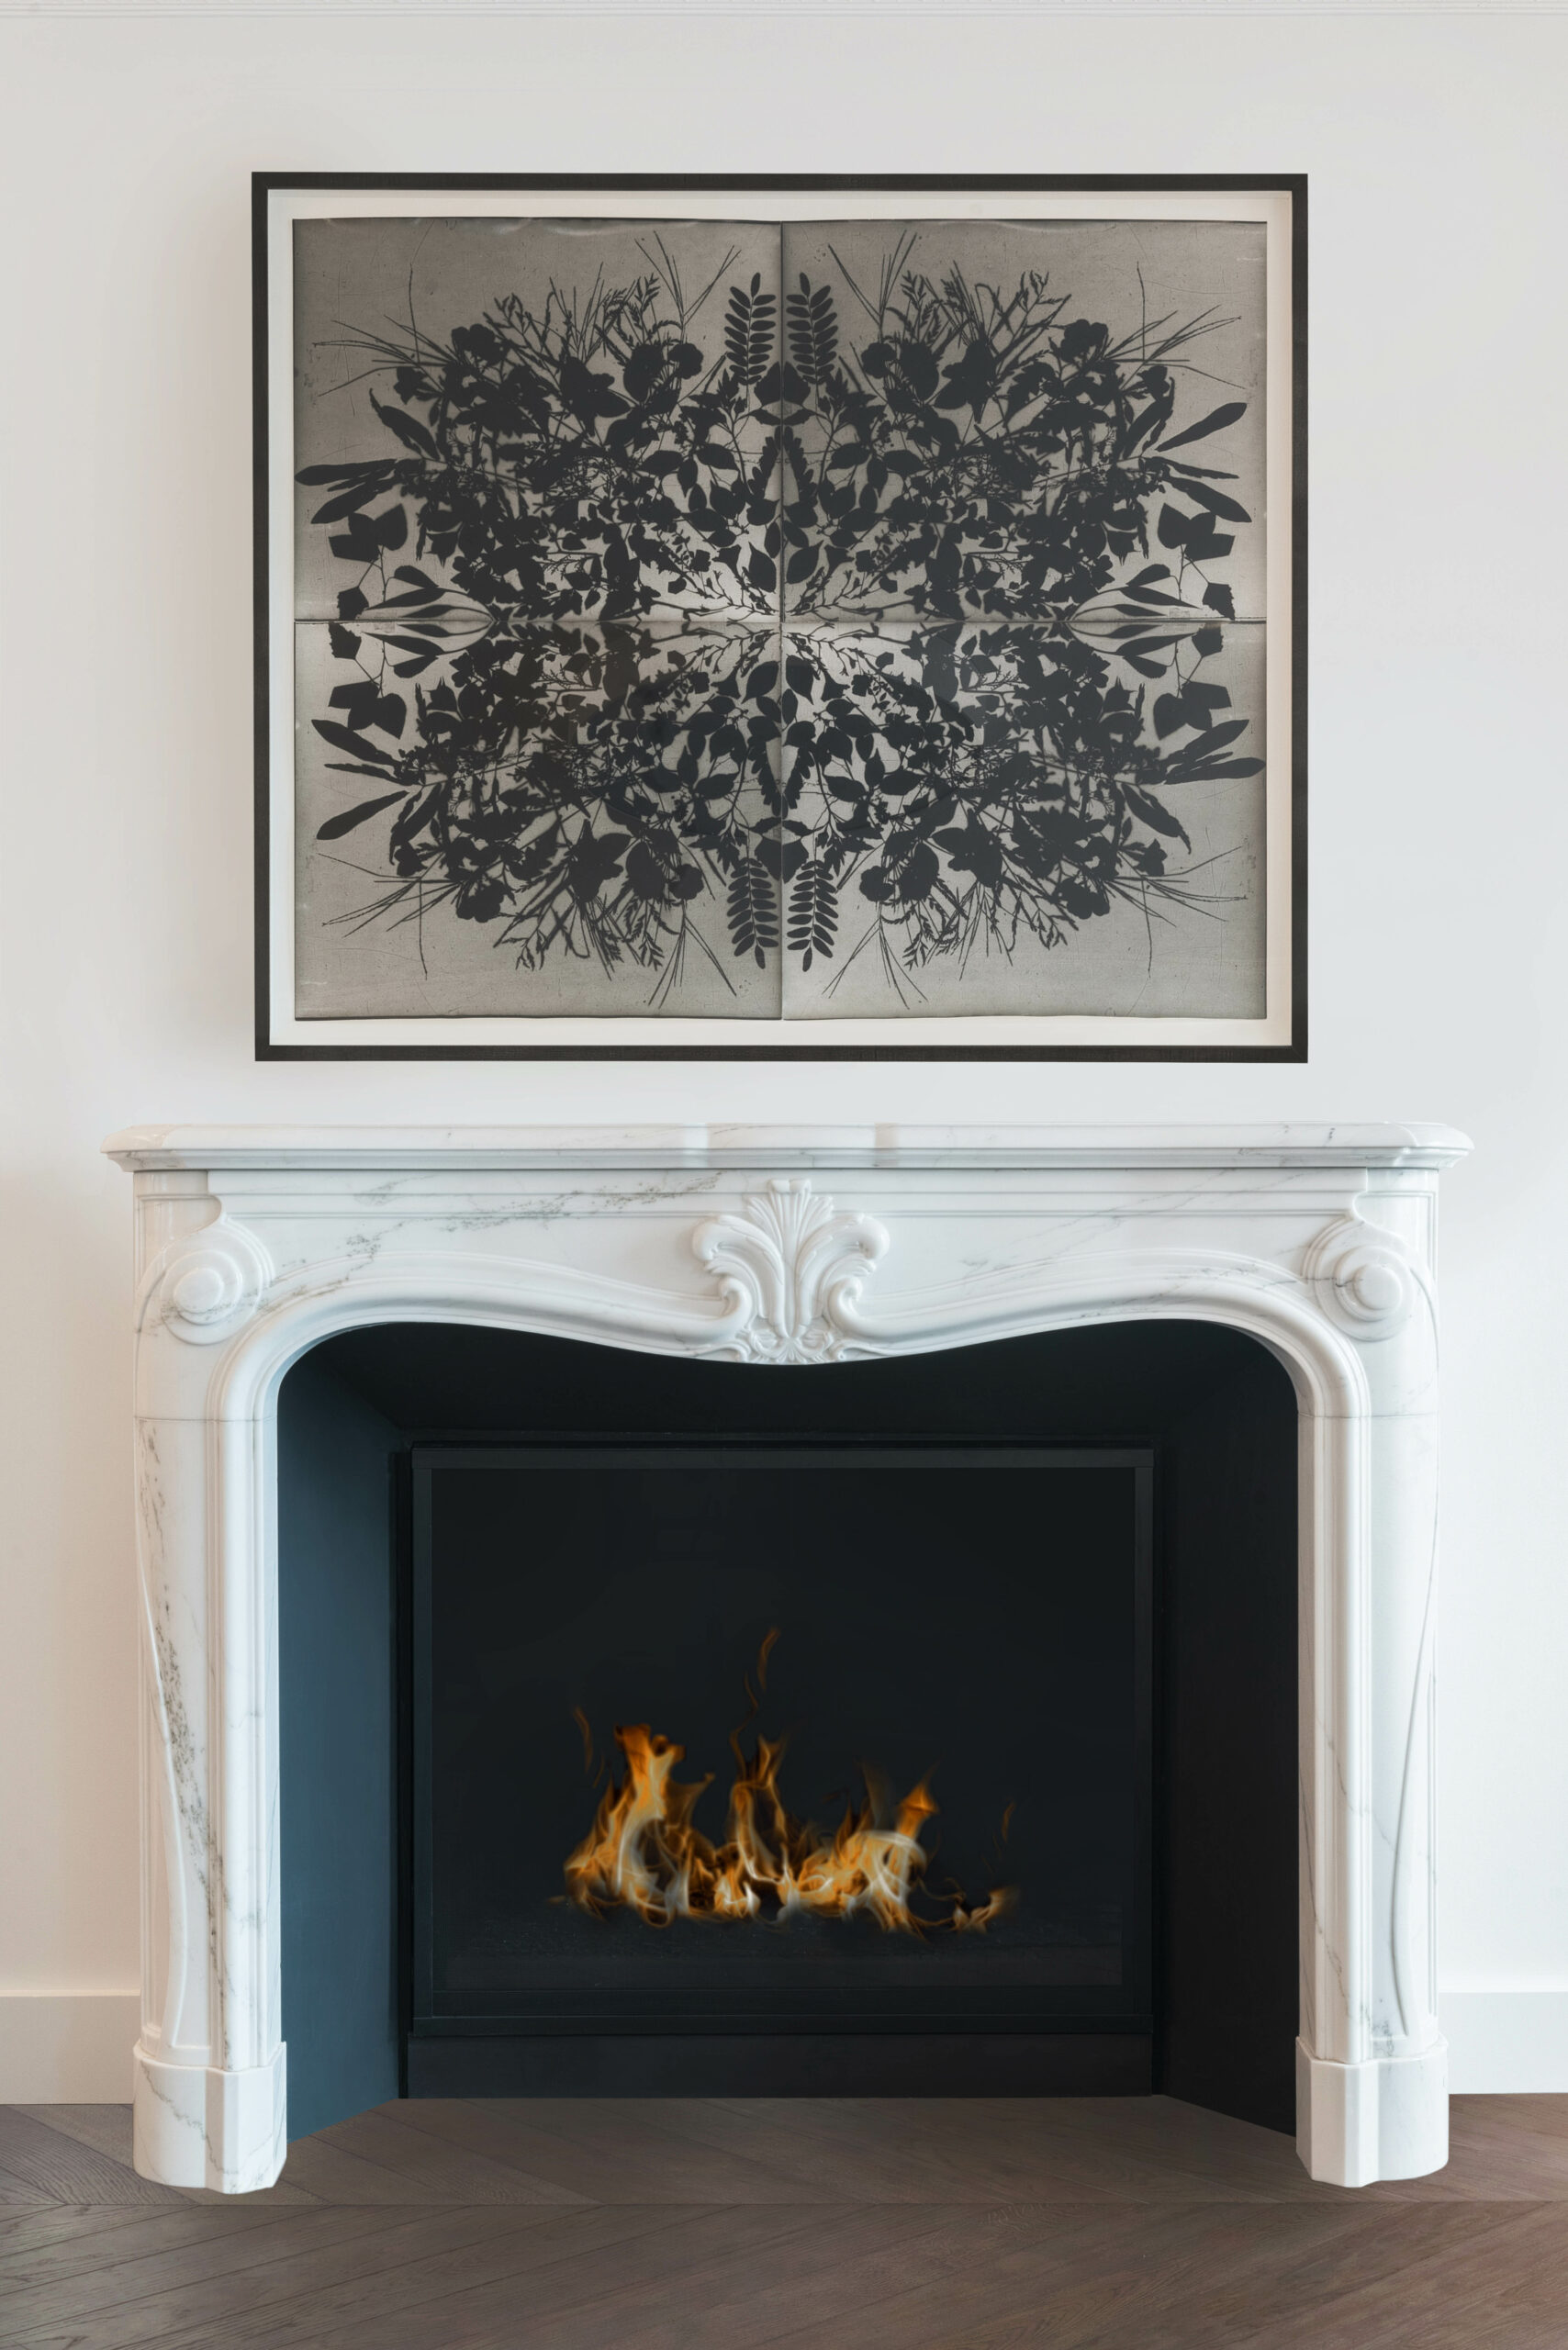 Hand-carved Carrara marble mantel and fireplace at a Boston residence.